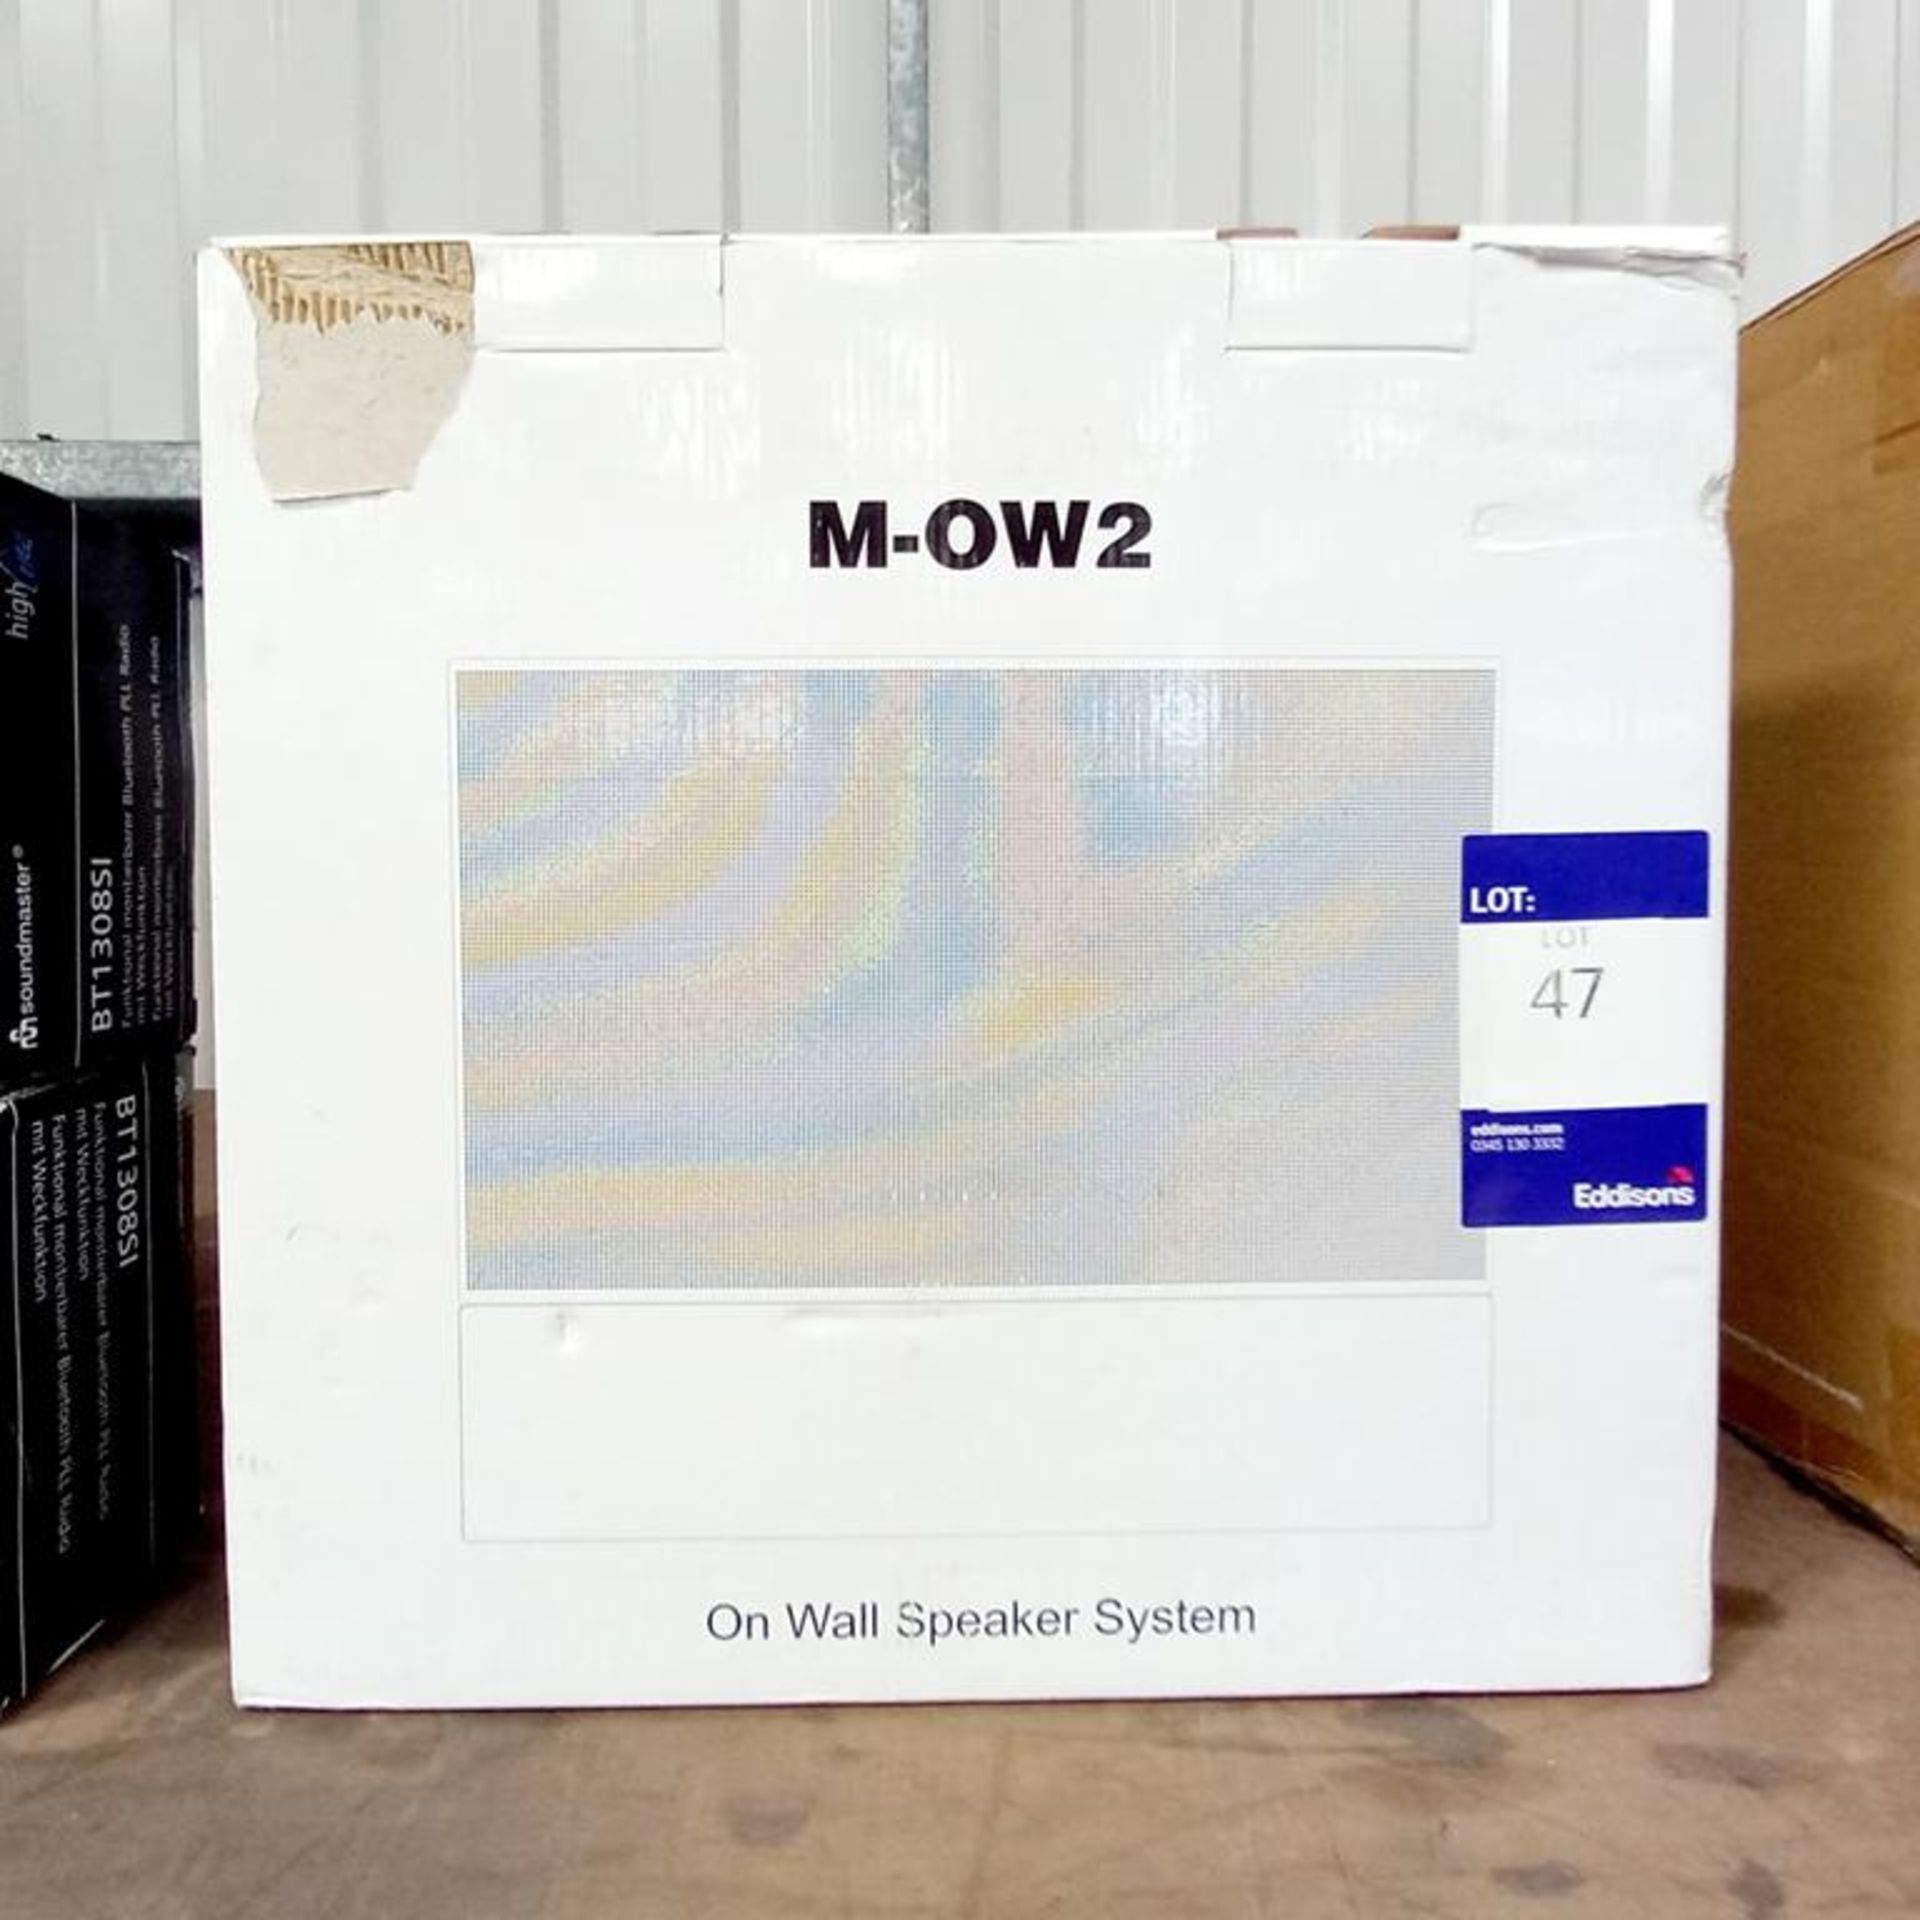 Systemline M-OW2 on wall speaker system and 4 x Marmitek Bluetooth Receivers - Image 6 of 10